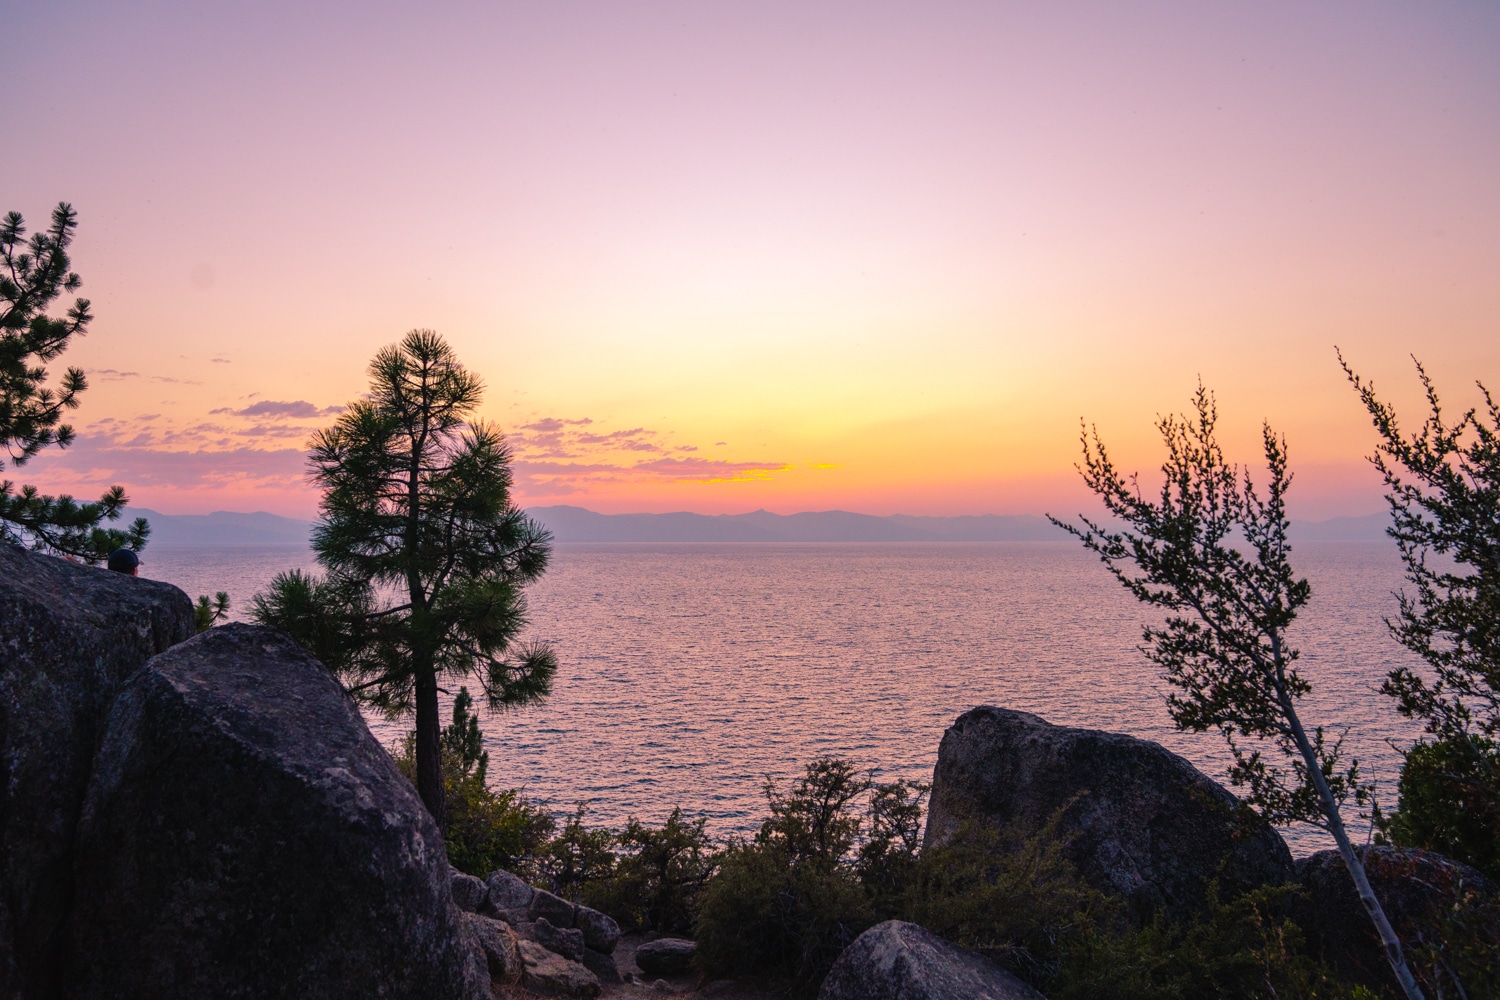 what to do in lake tahoe